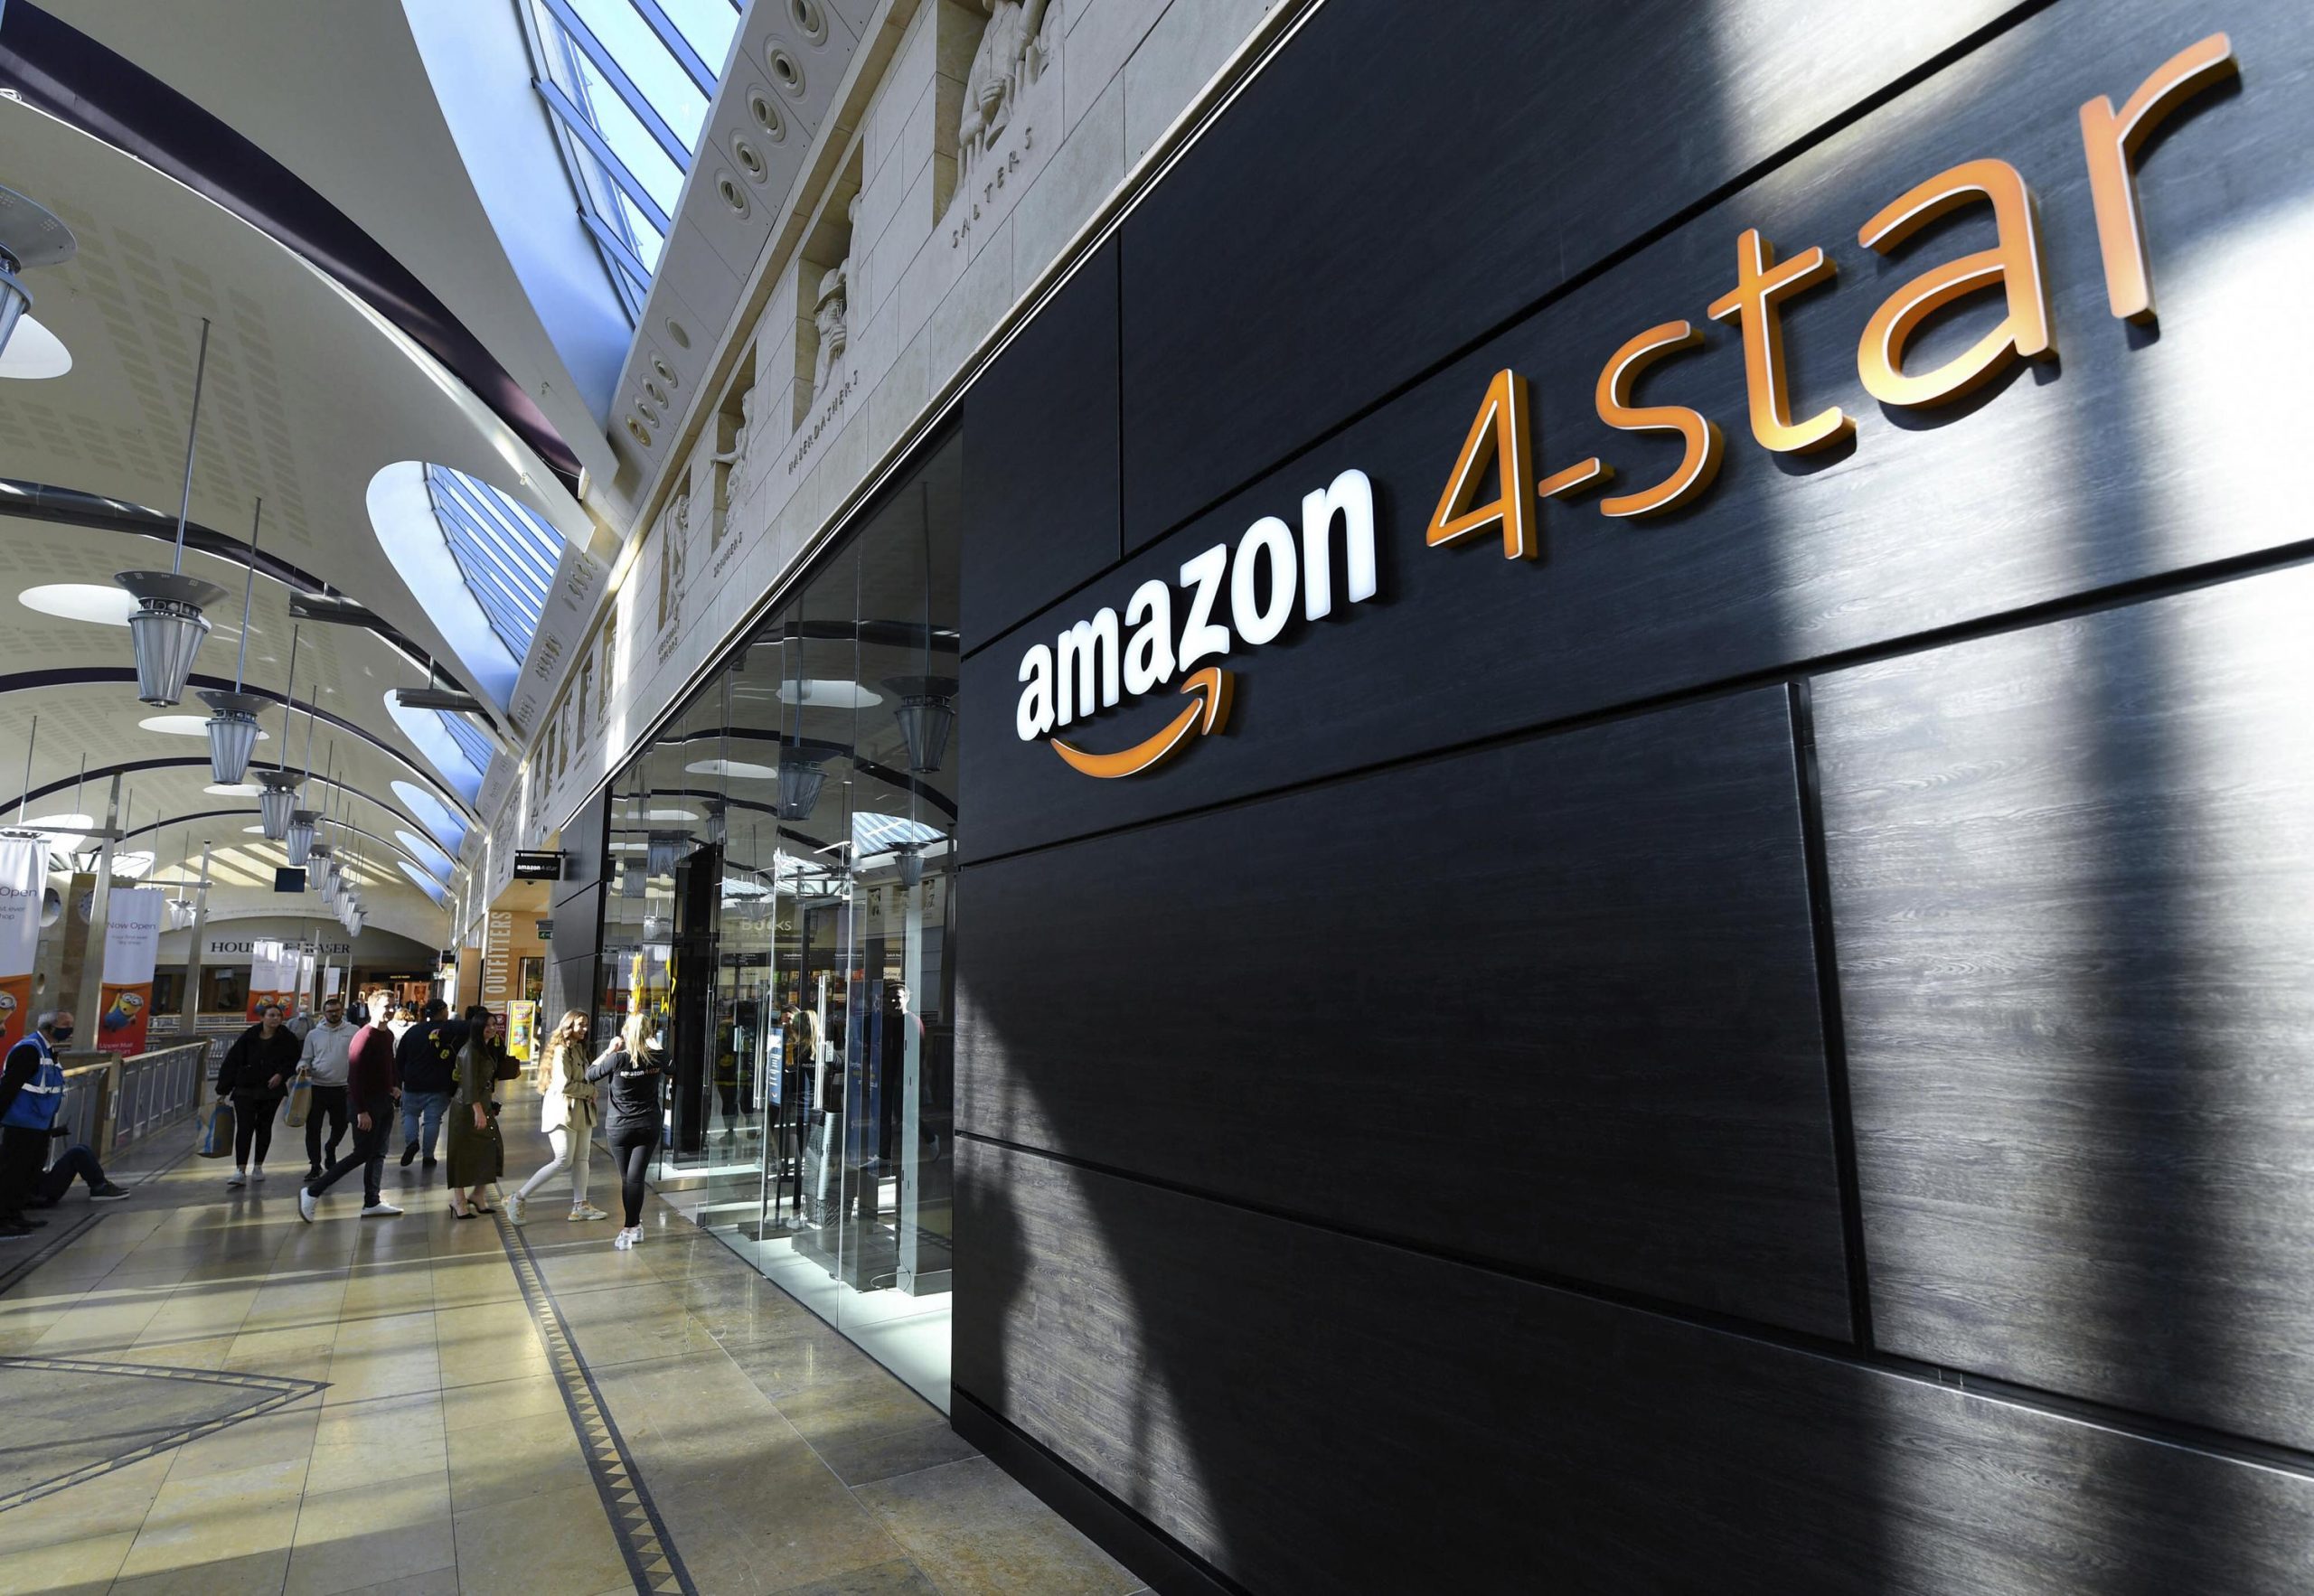 Amazon has opened a “4 star” physical store in the UK